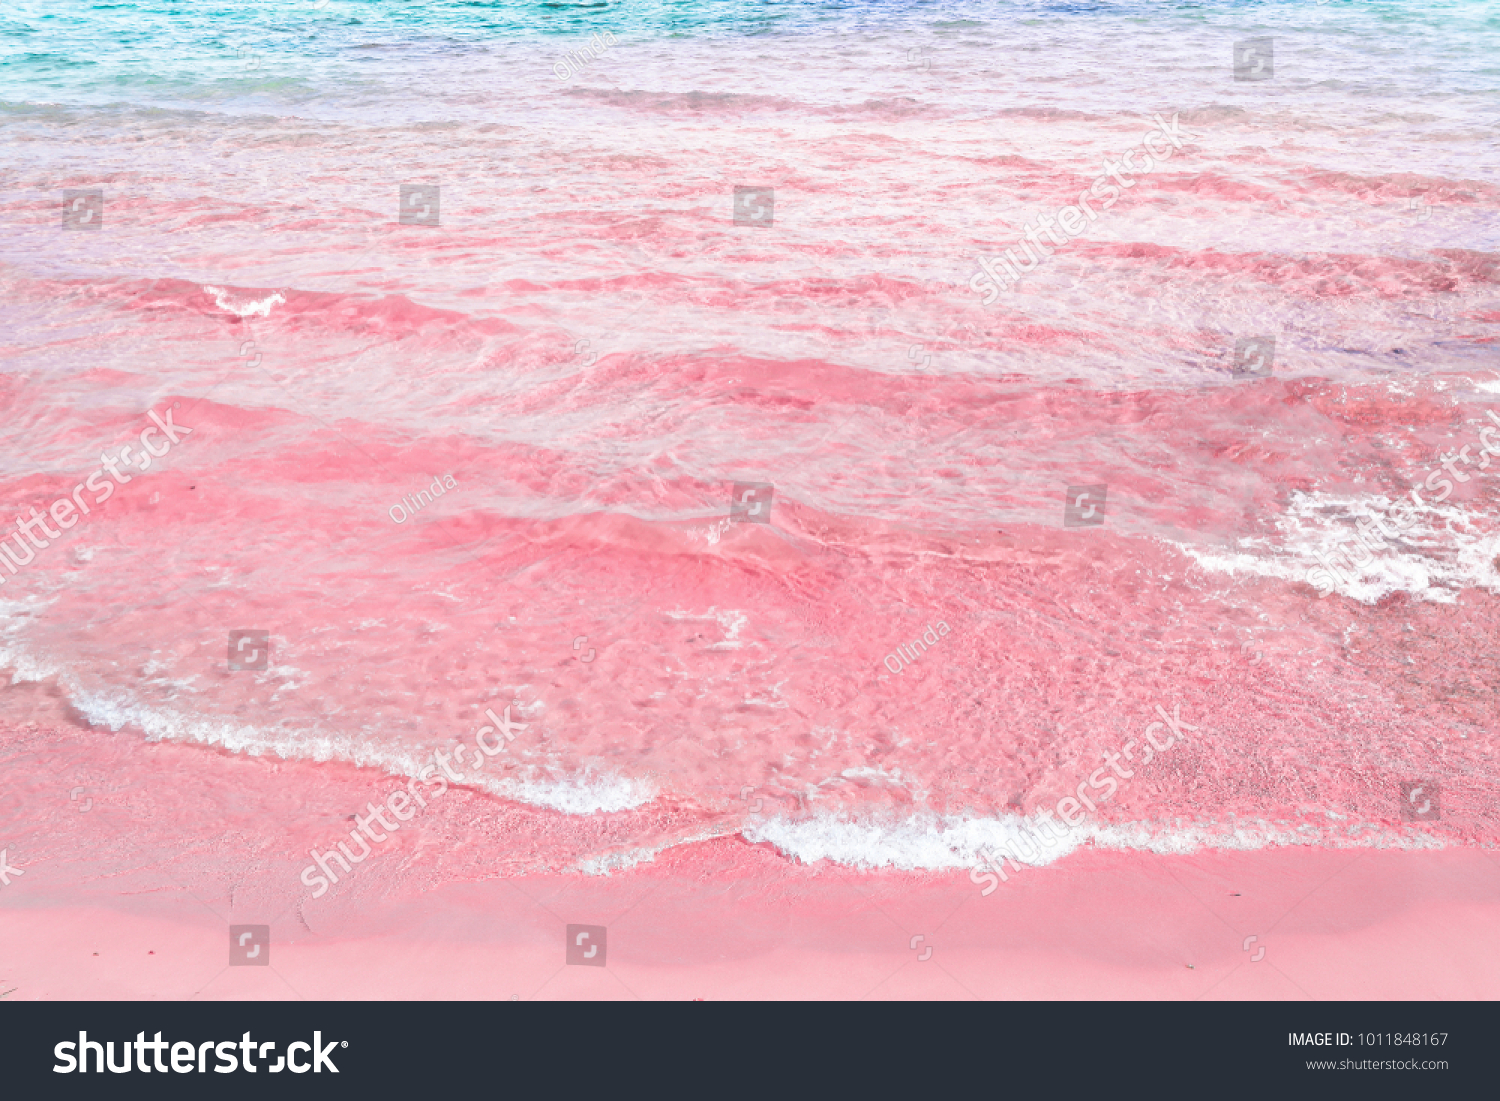 Foamy Rippled Clear Sea Wave Rolling to Pink Sand Shore Turquoise Blue Water. Beautiful Tranquil Idyllic Scenery. Tropical Beach Vacation Relaxation Paradise. Copy Space Elegant Styled Toned Image #1011848167